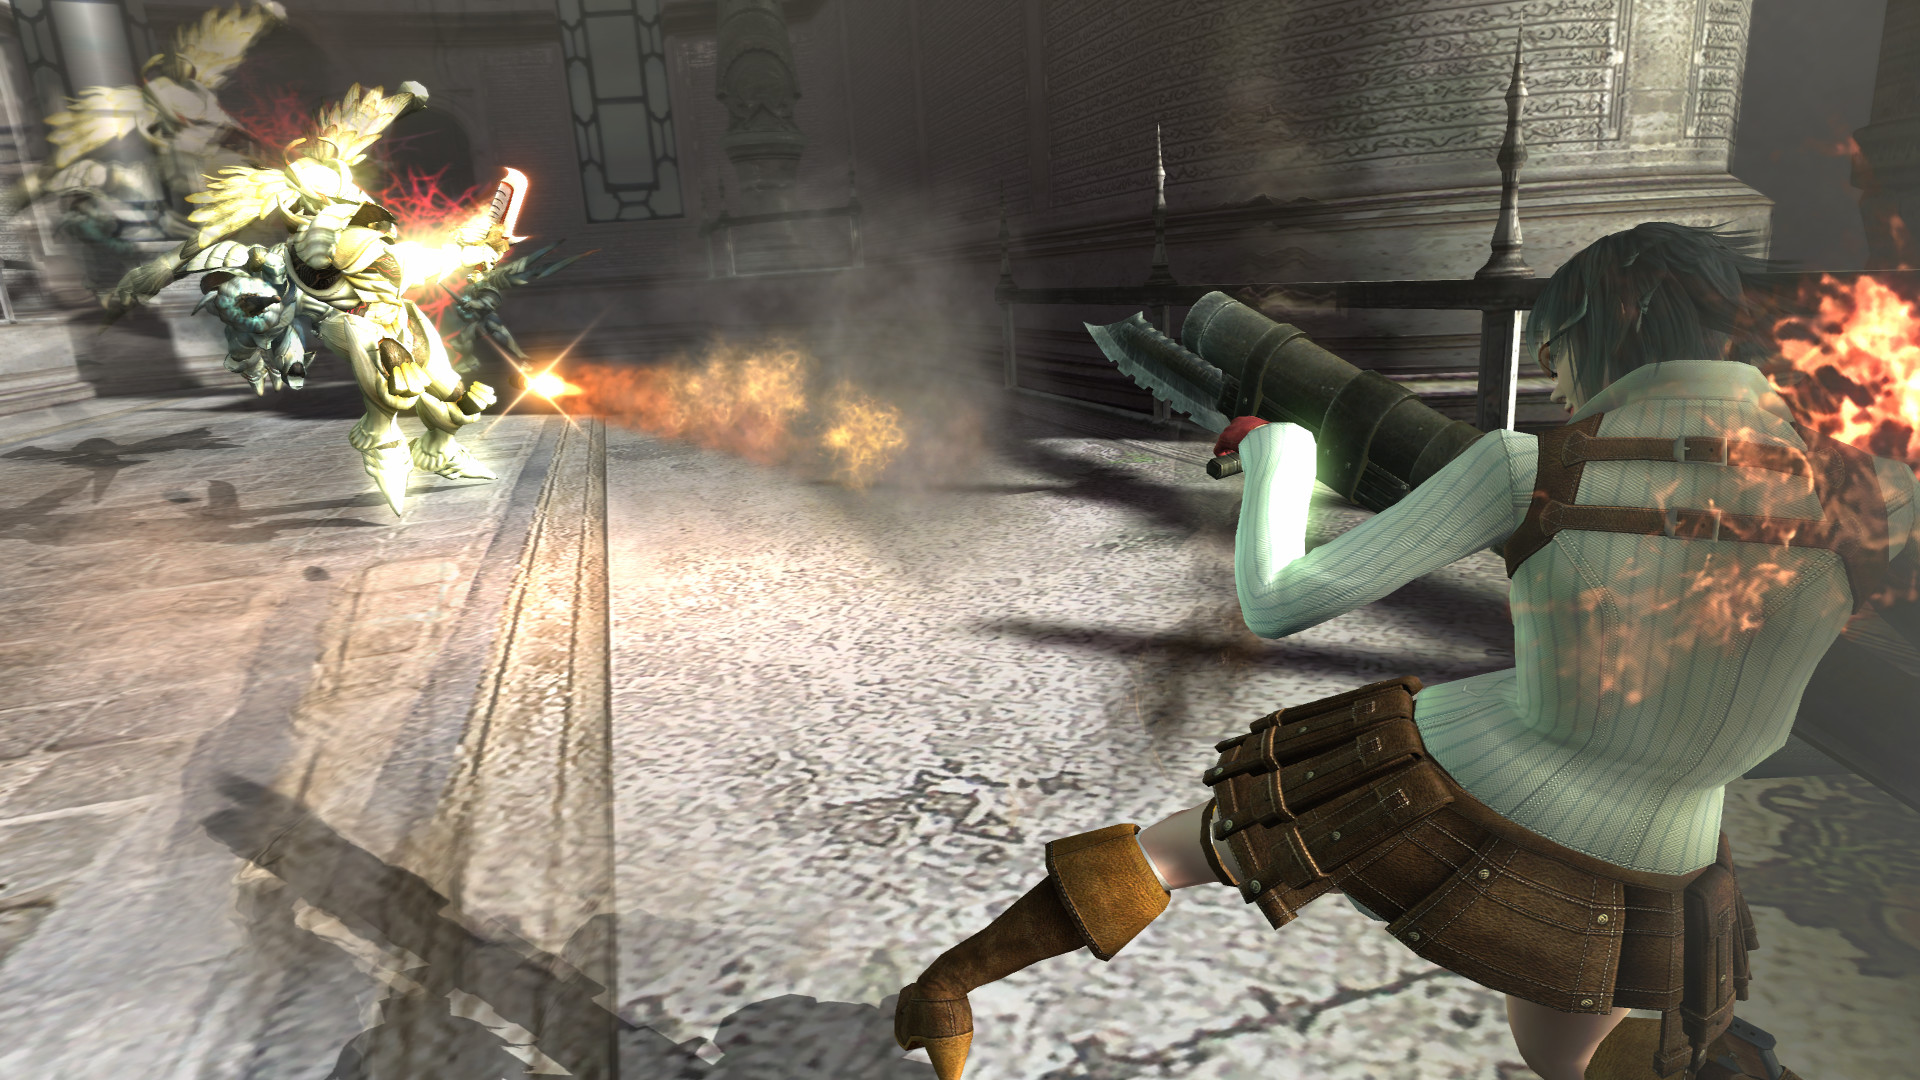 Devil May Cry 4 Special Edition New Screenshots